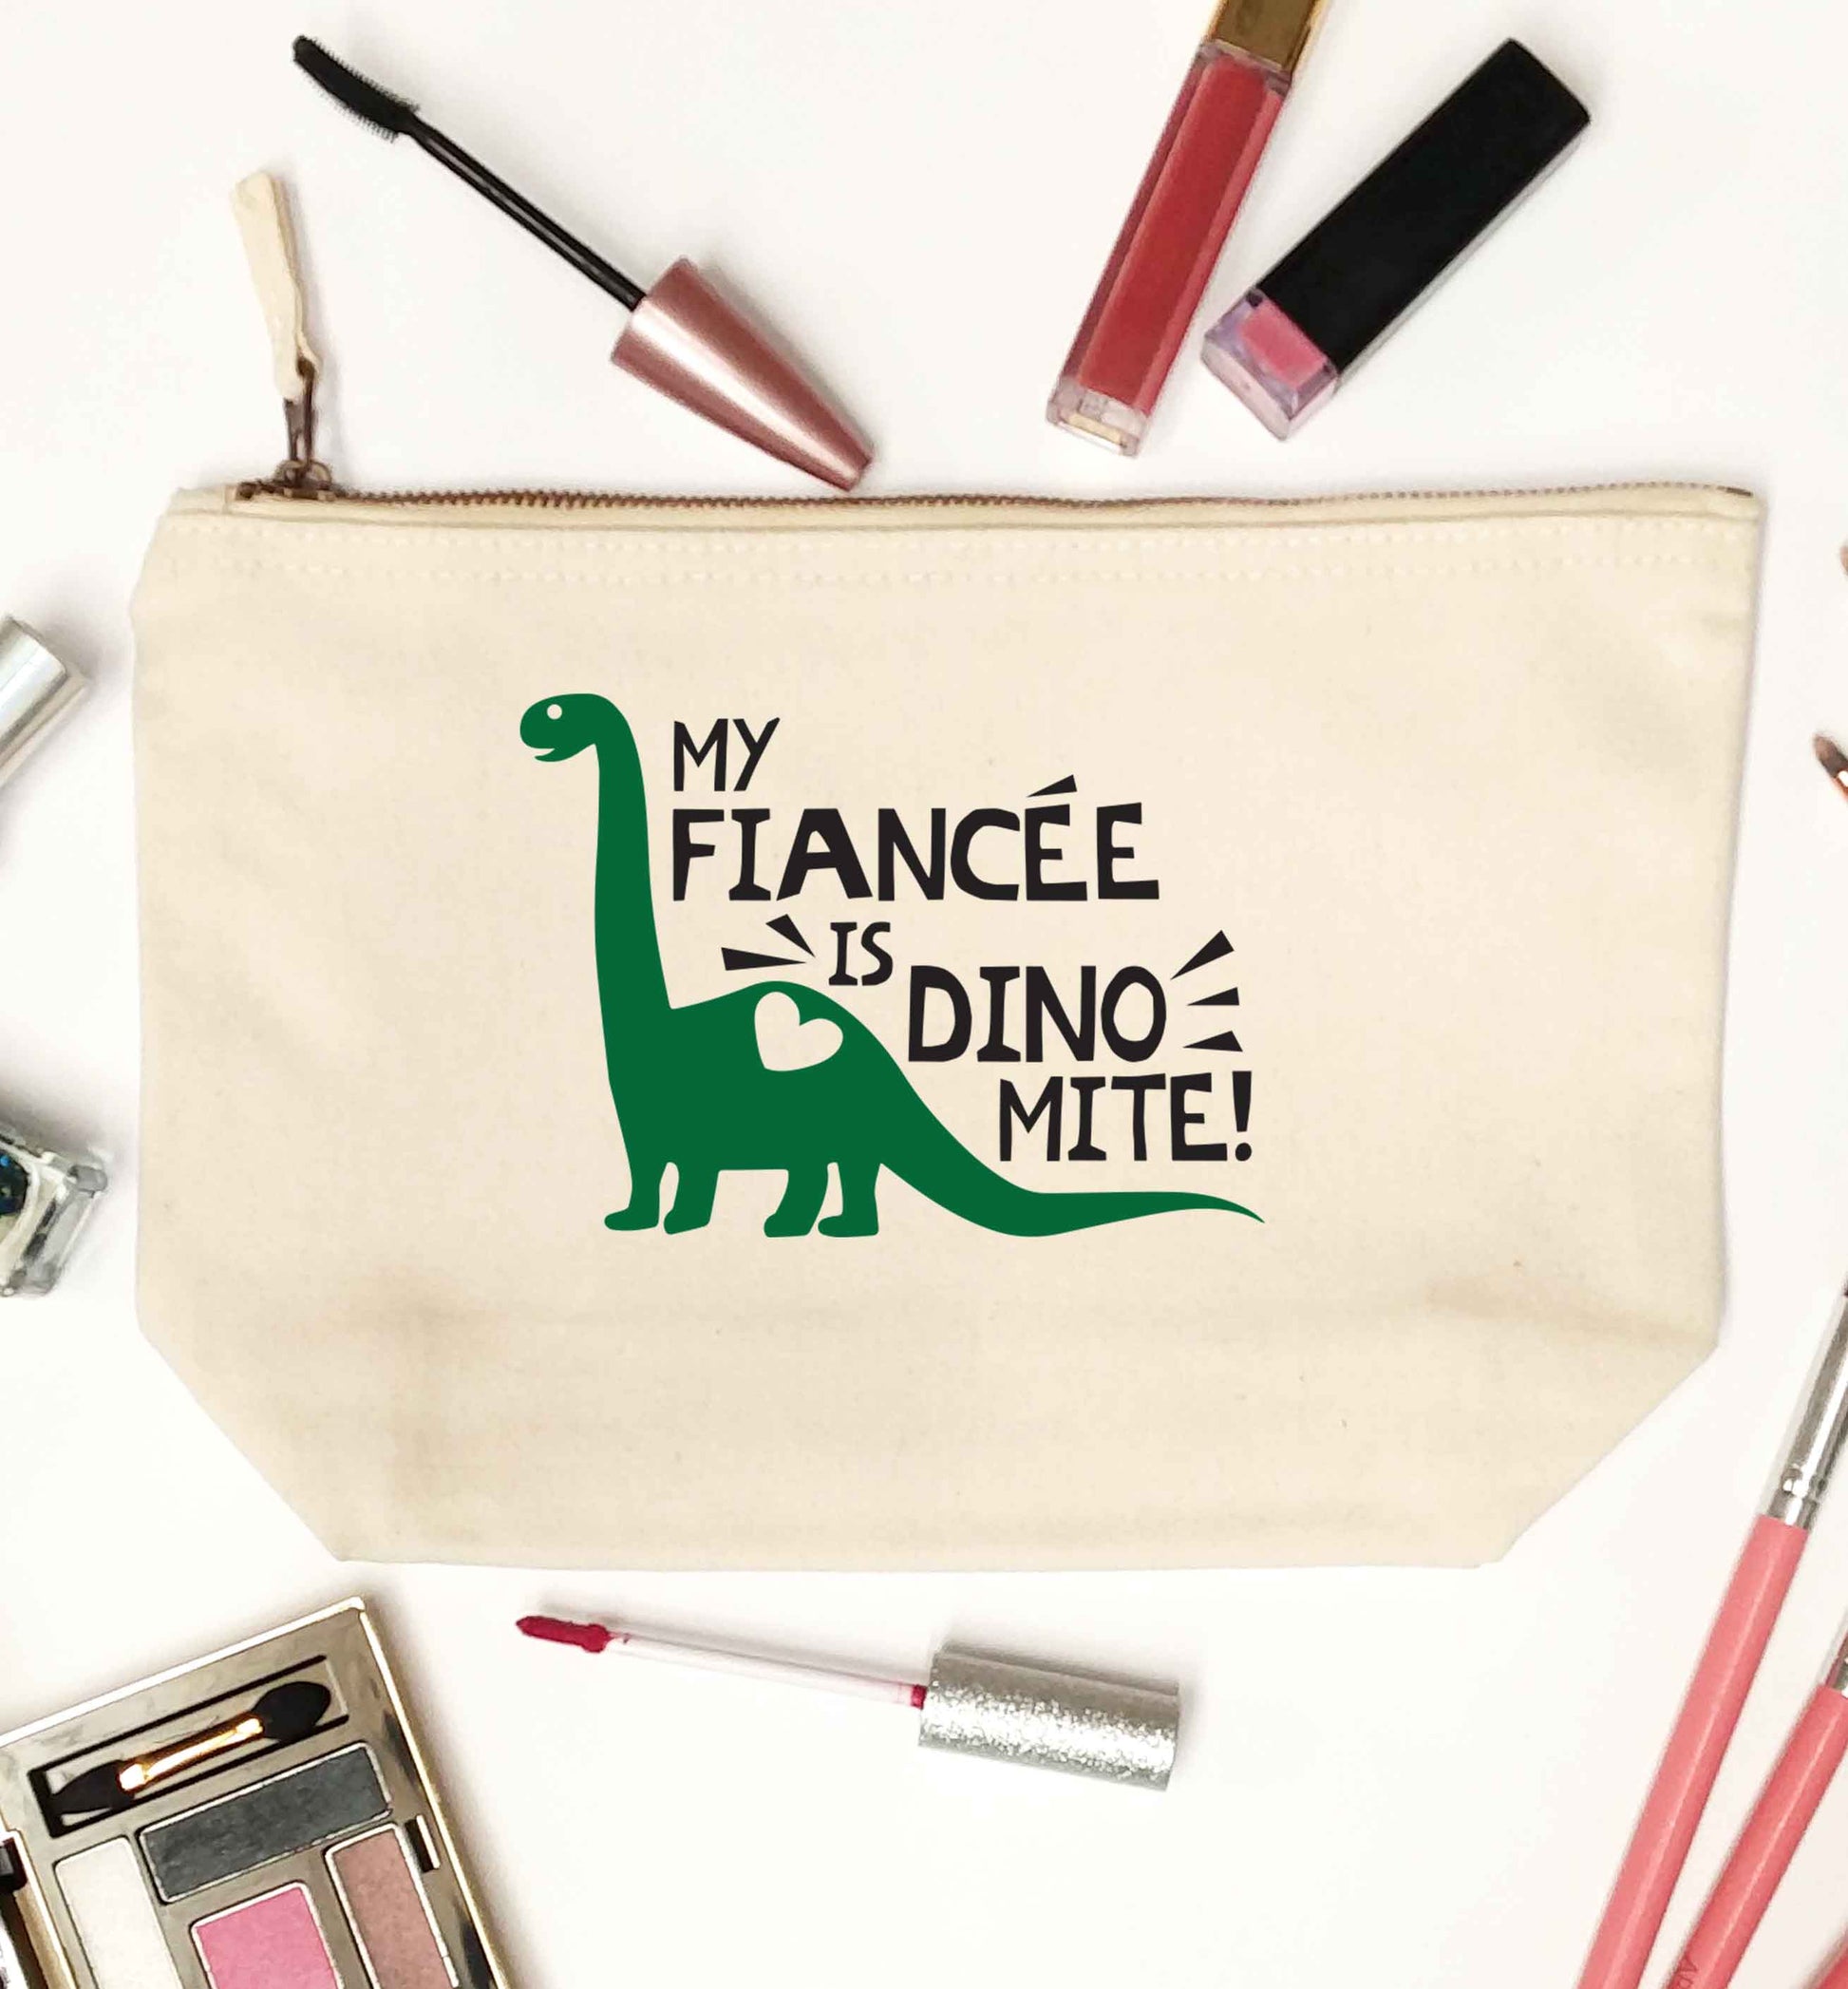 My fiancee is dinomite! natural makeup bag